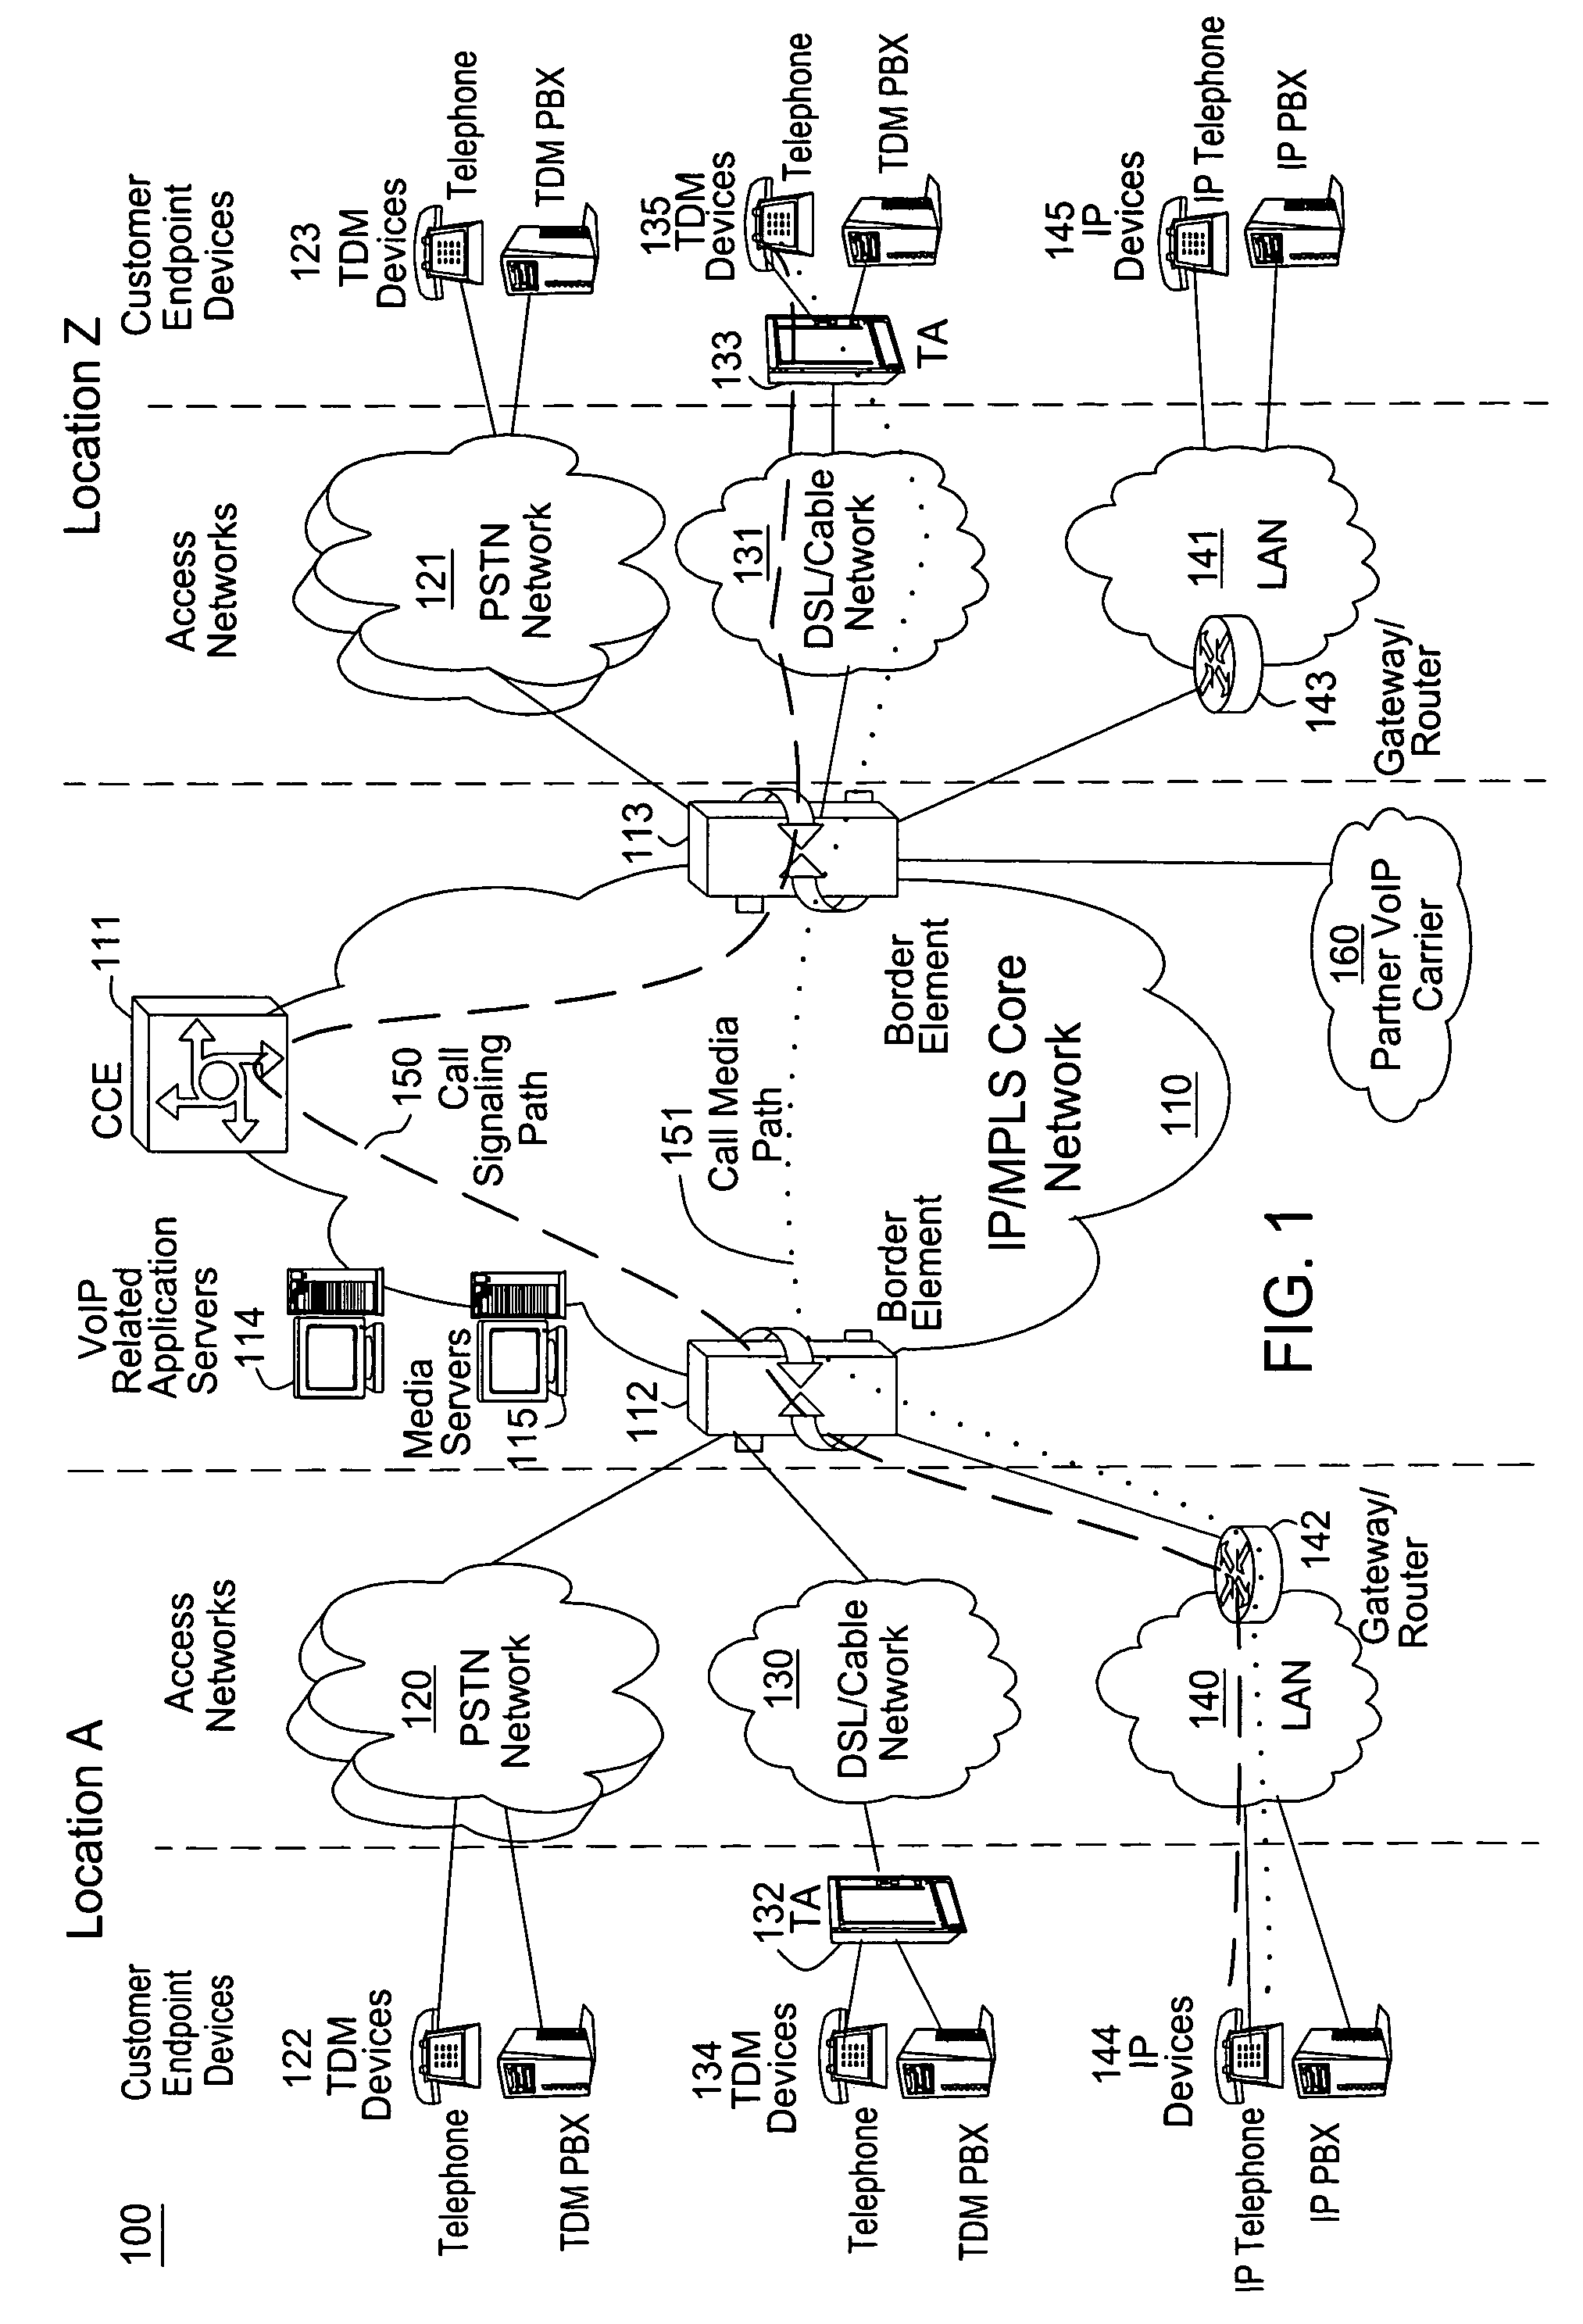 Method and apparatus for automating the detection and clearance of congestion in a communication network